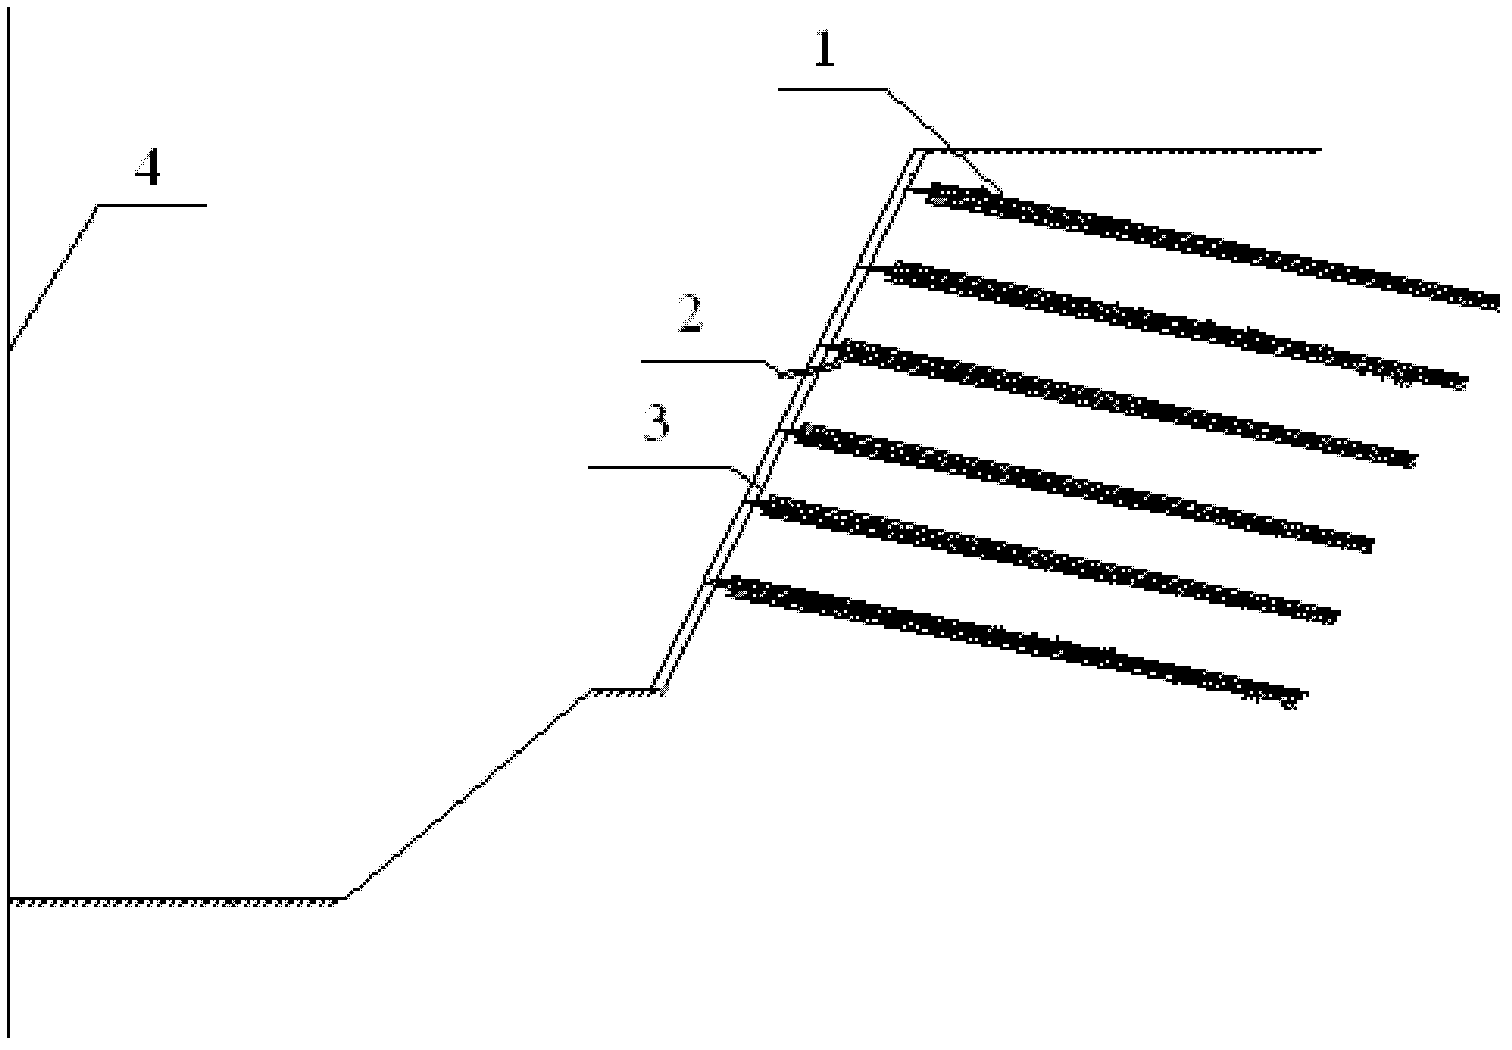 Supporting method for construction of swirl well